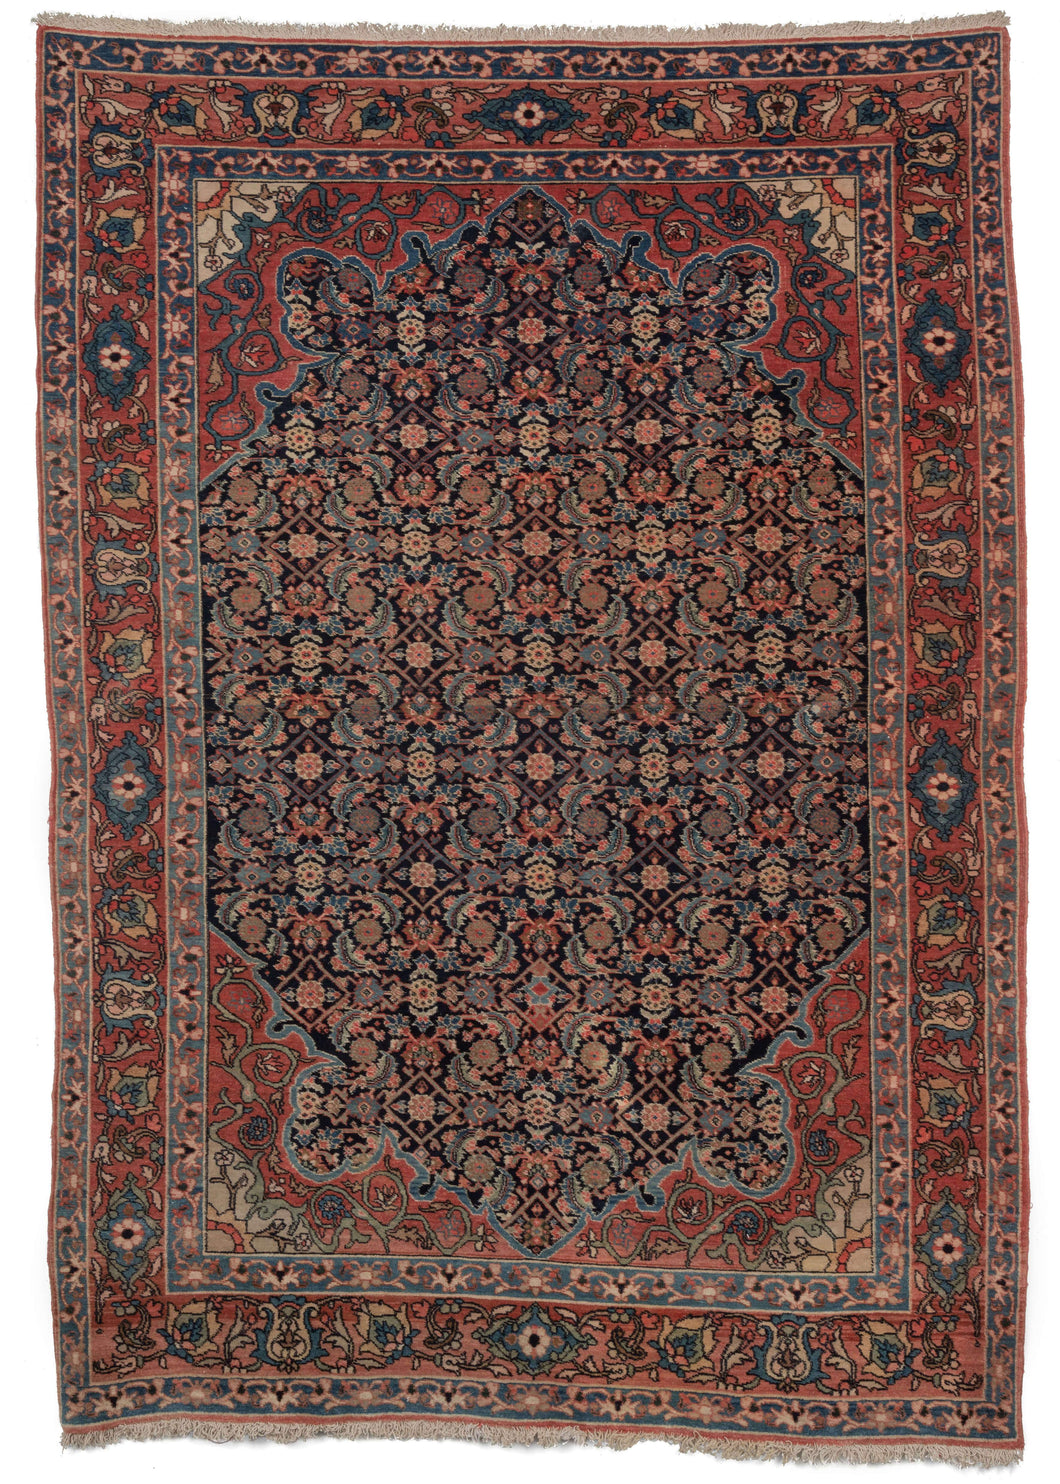 Antique west Persian Farahan Sarouk Area rug featuring an all over Herati design on a deep blue field with soft red and white scalloped cornices. The main border is a detailed scrolling palmette design with the two minor borders a simplified take on the same theme.